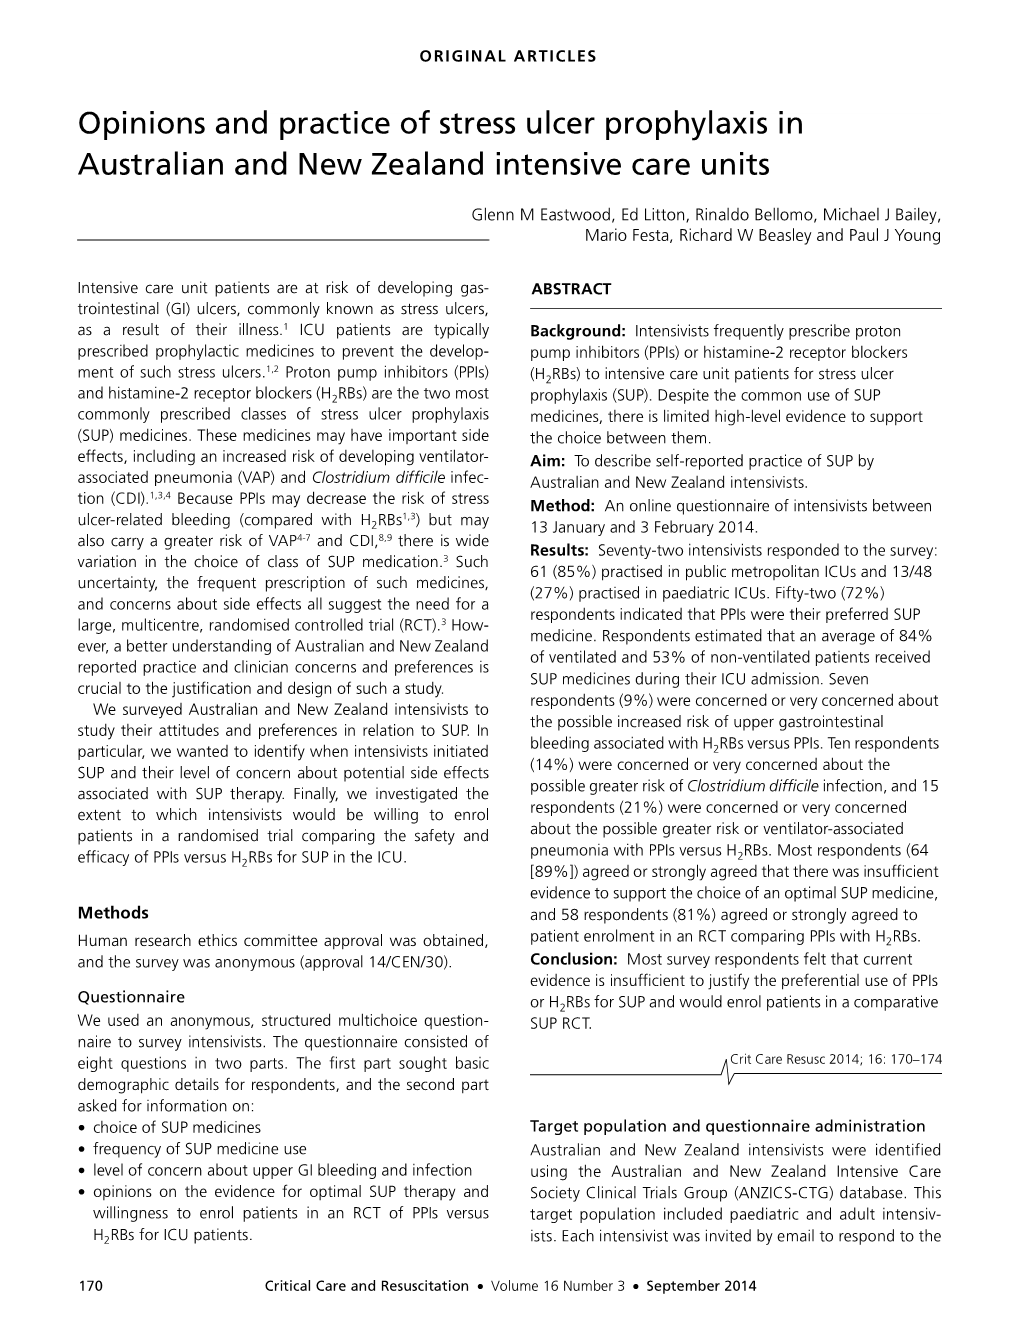 Opinions and Practice of Stress Ulcer Prophylaxis in Australian and New Zealand Intensive Care Units